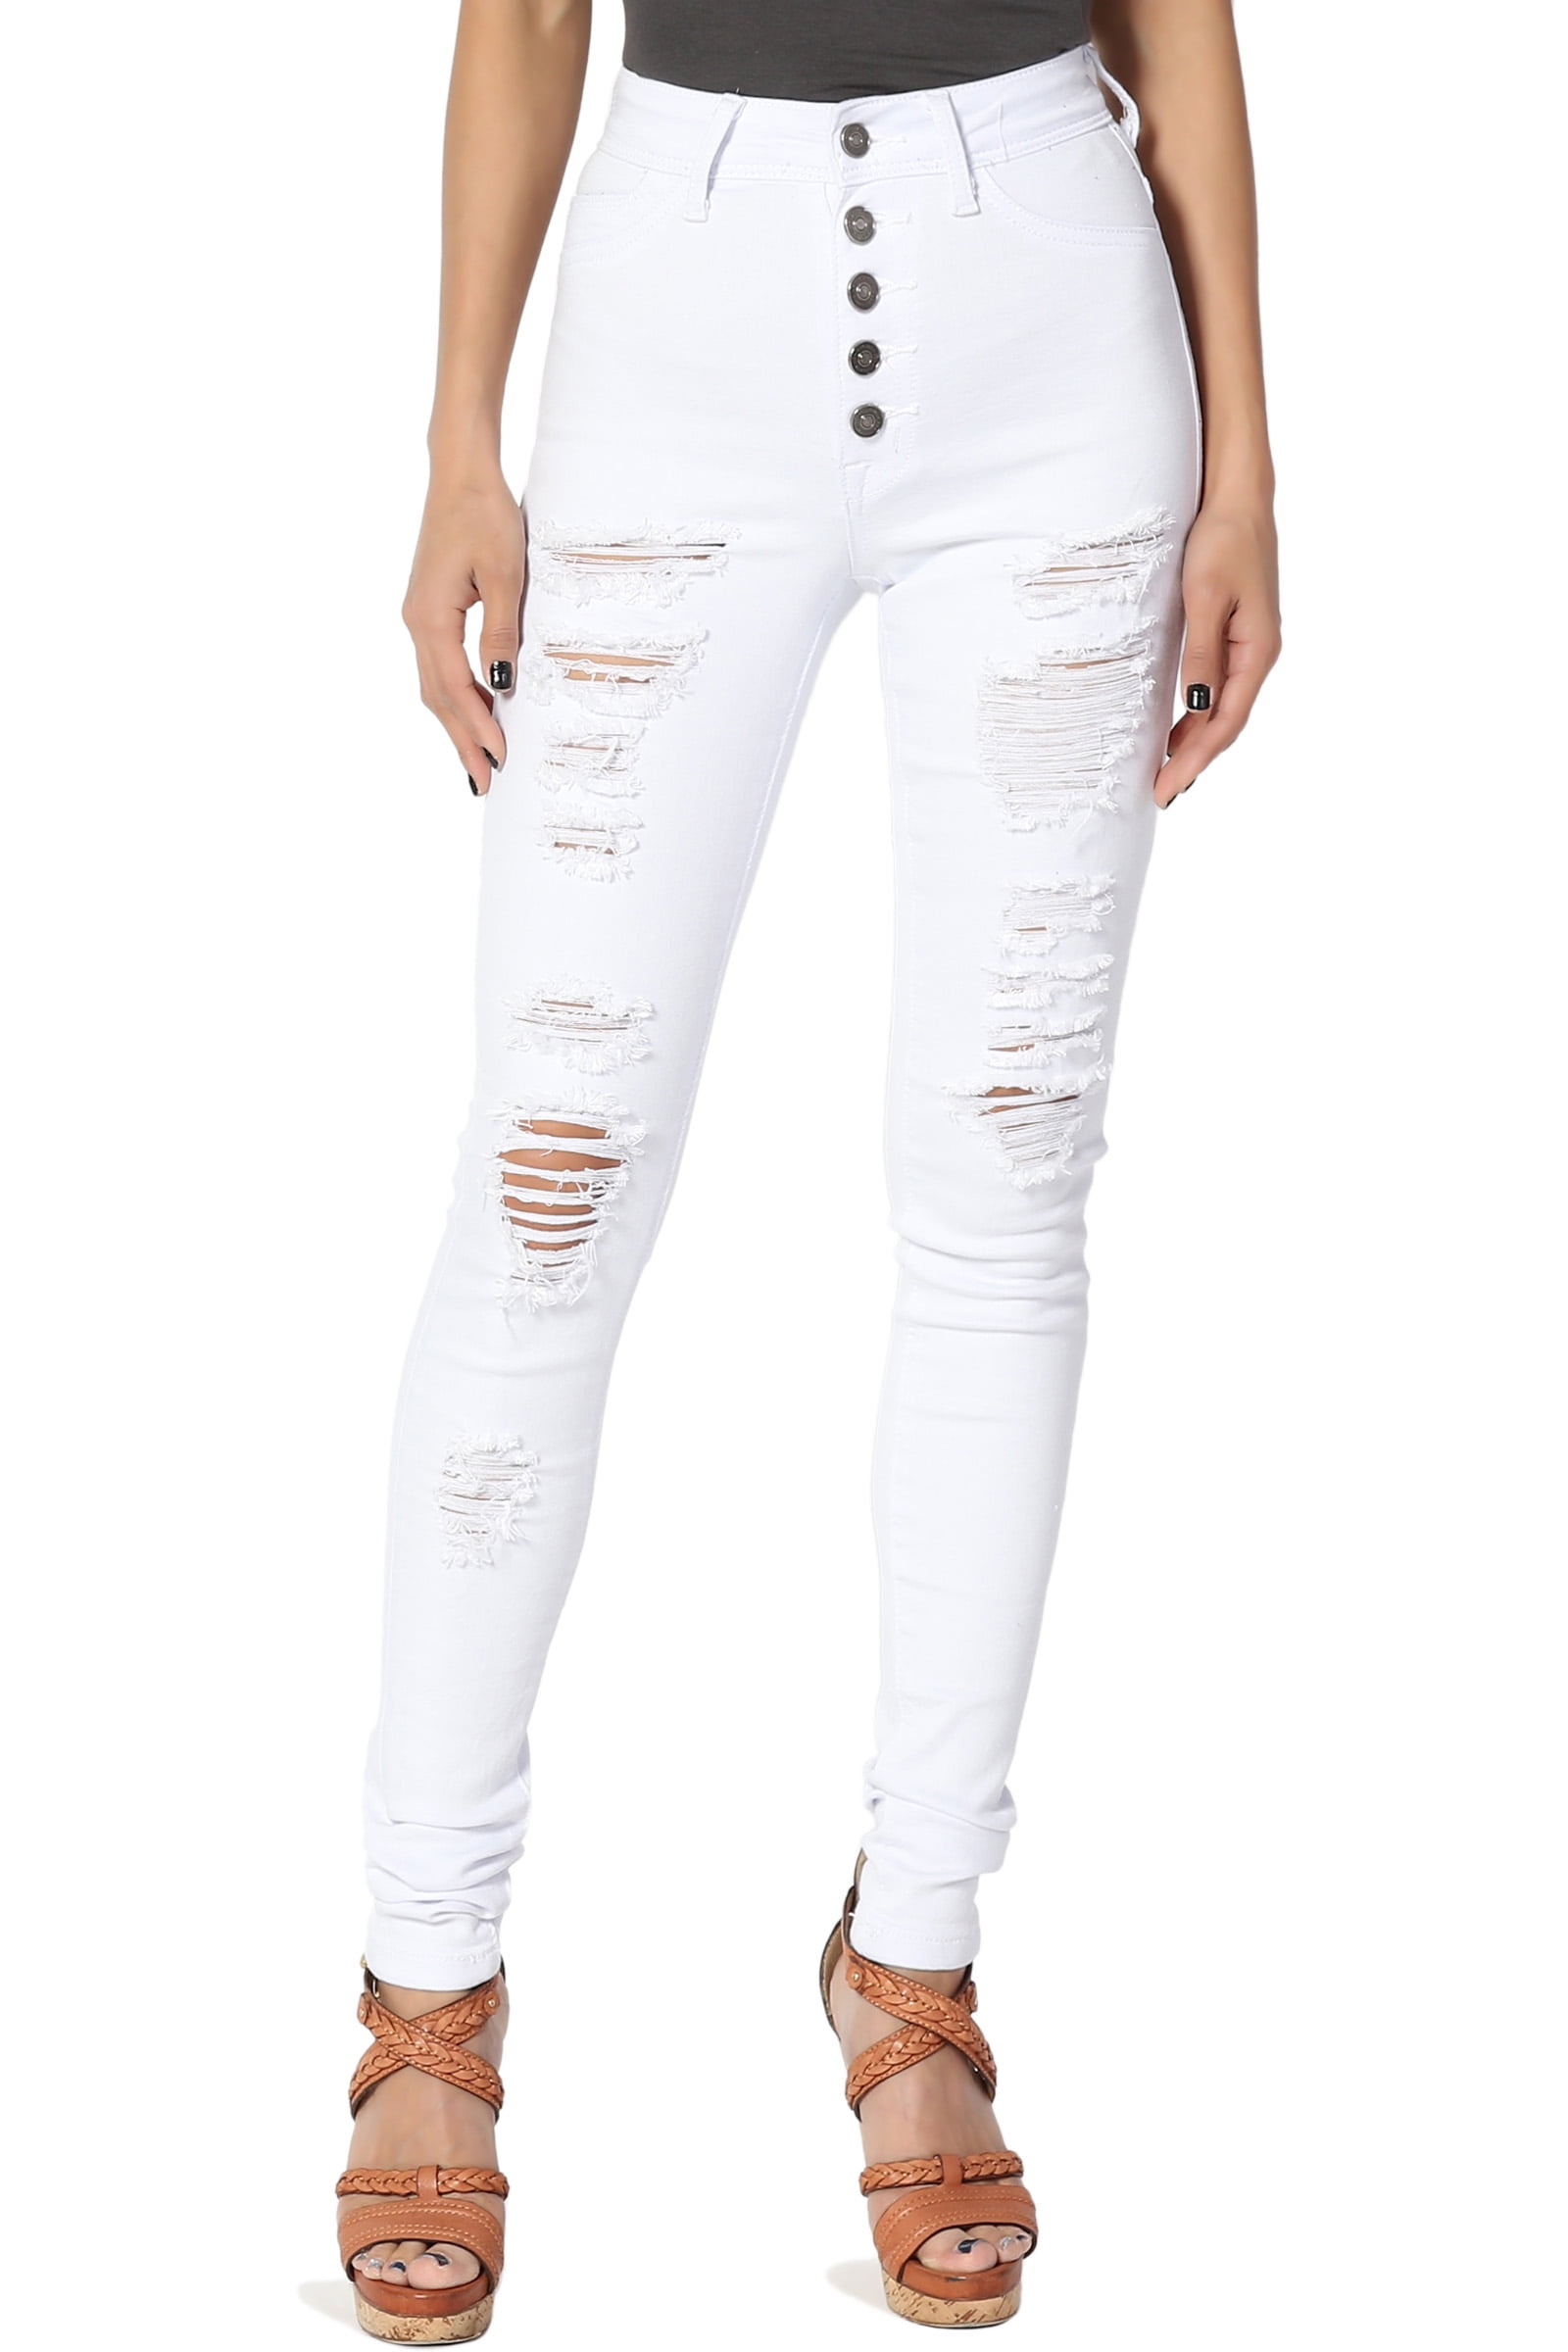 Themogan Themogan Women S Ripped Distressed Destroyed Torned High Waist White Skinny Jeans